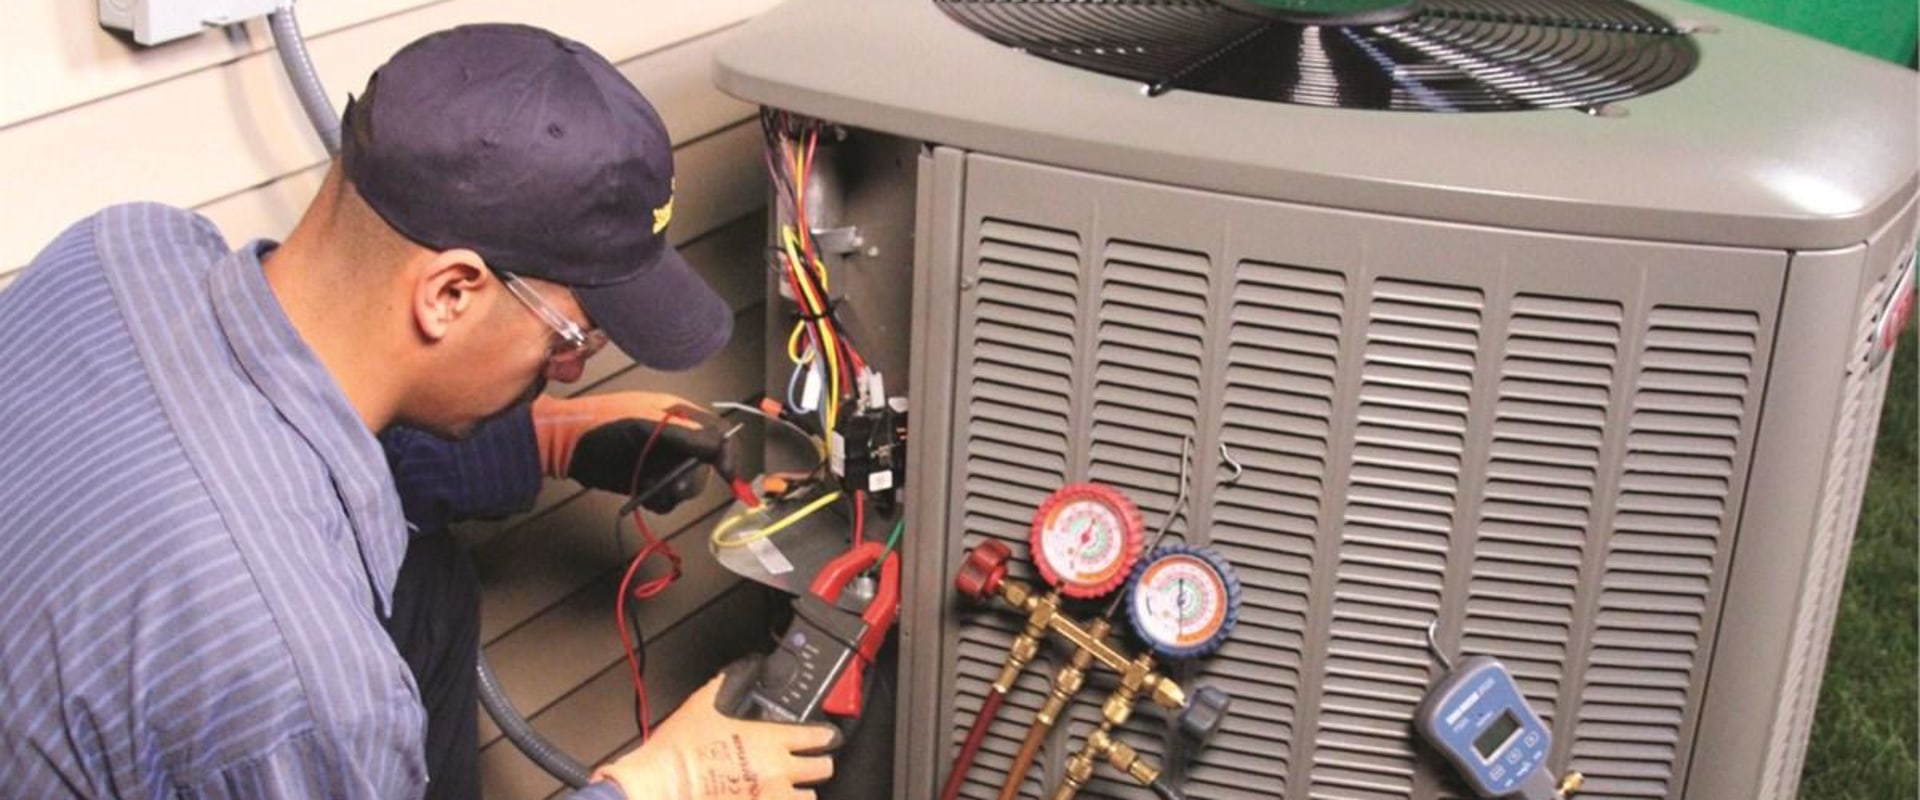 How Long Does an HVAC Tune Up Service Take? - An Expert's Perspective